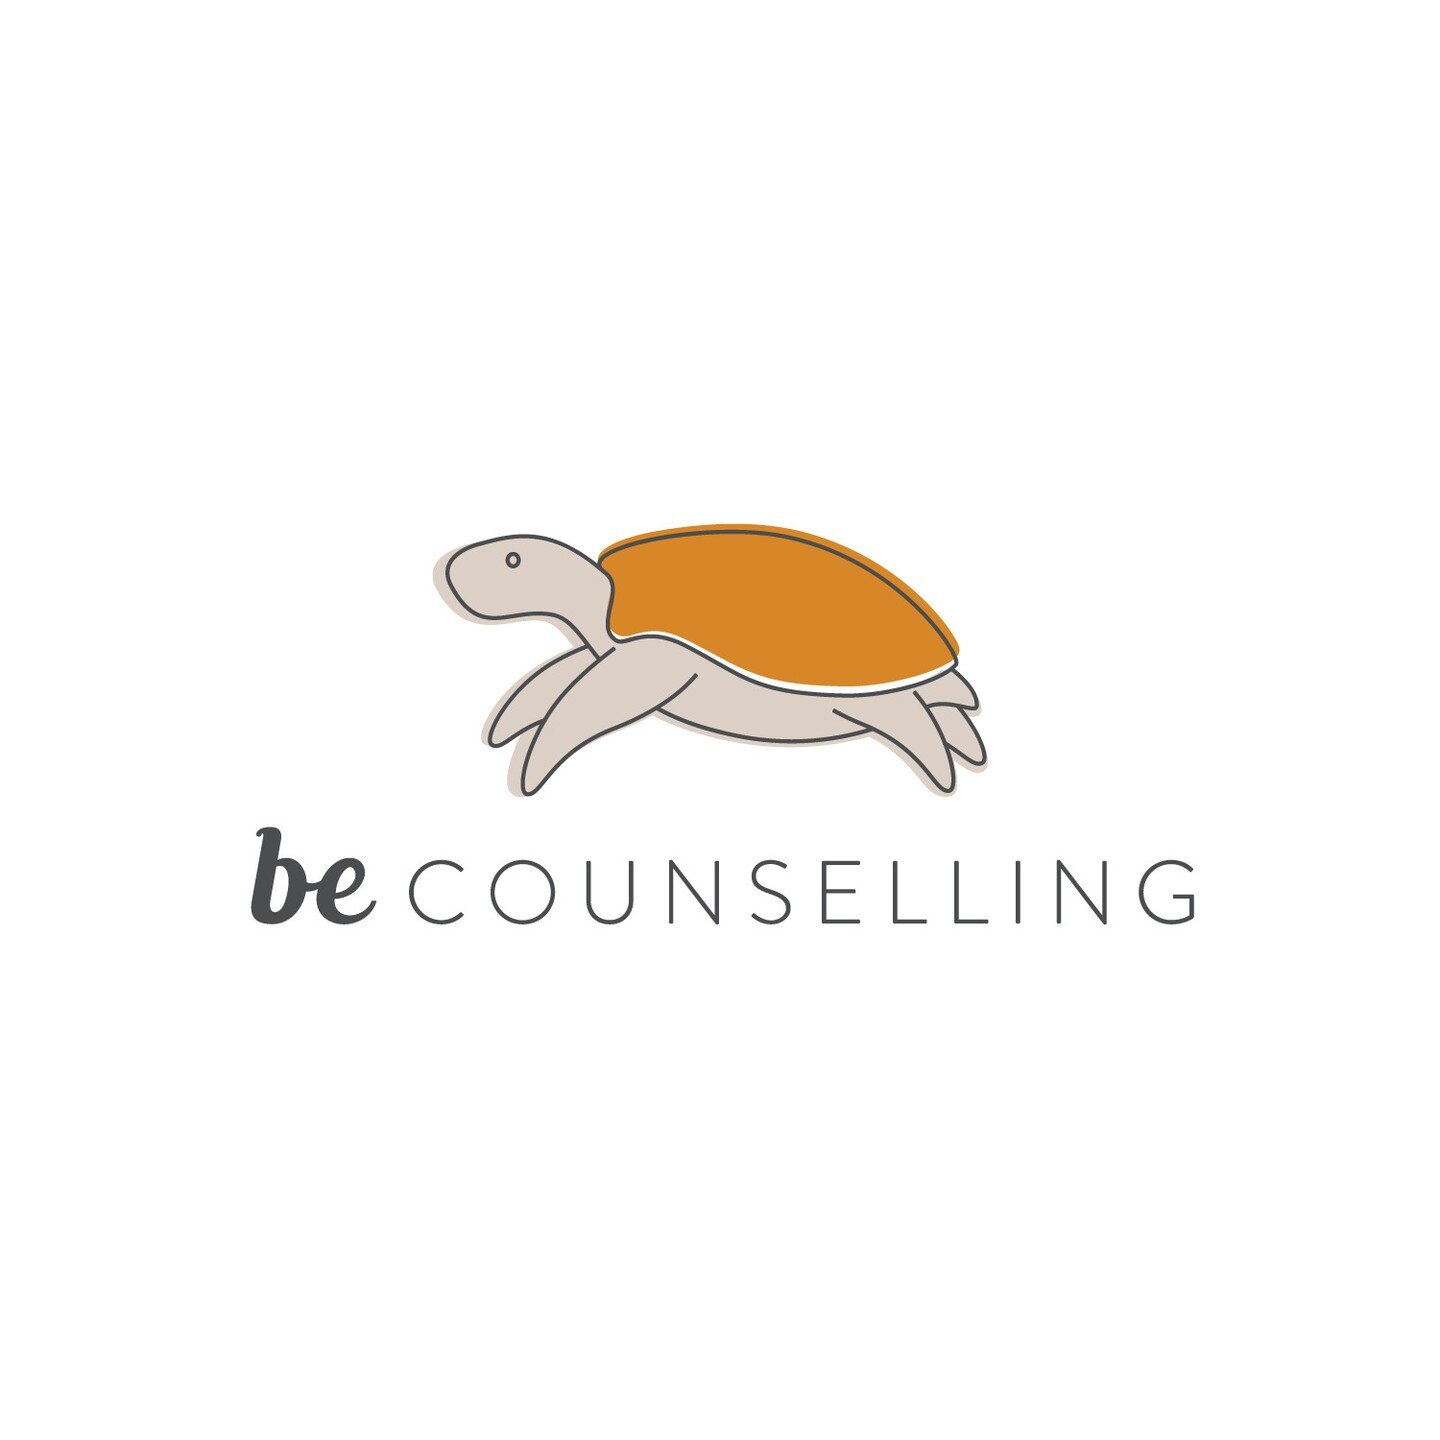 Too cute not to share 🐢

Some initial concepts for a counselling practice. 

In the end the client went in a different direction so these little cuties get to live here for now.

Reach out if this 'lil guy should live on in your brand!
.
.
.
.
#bran